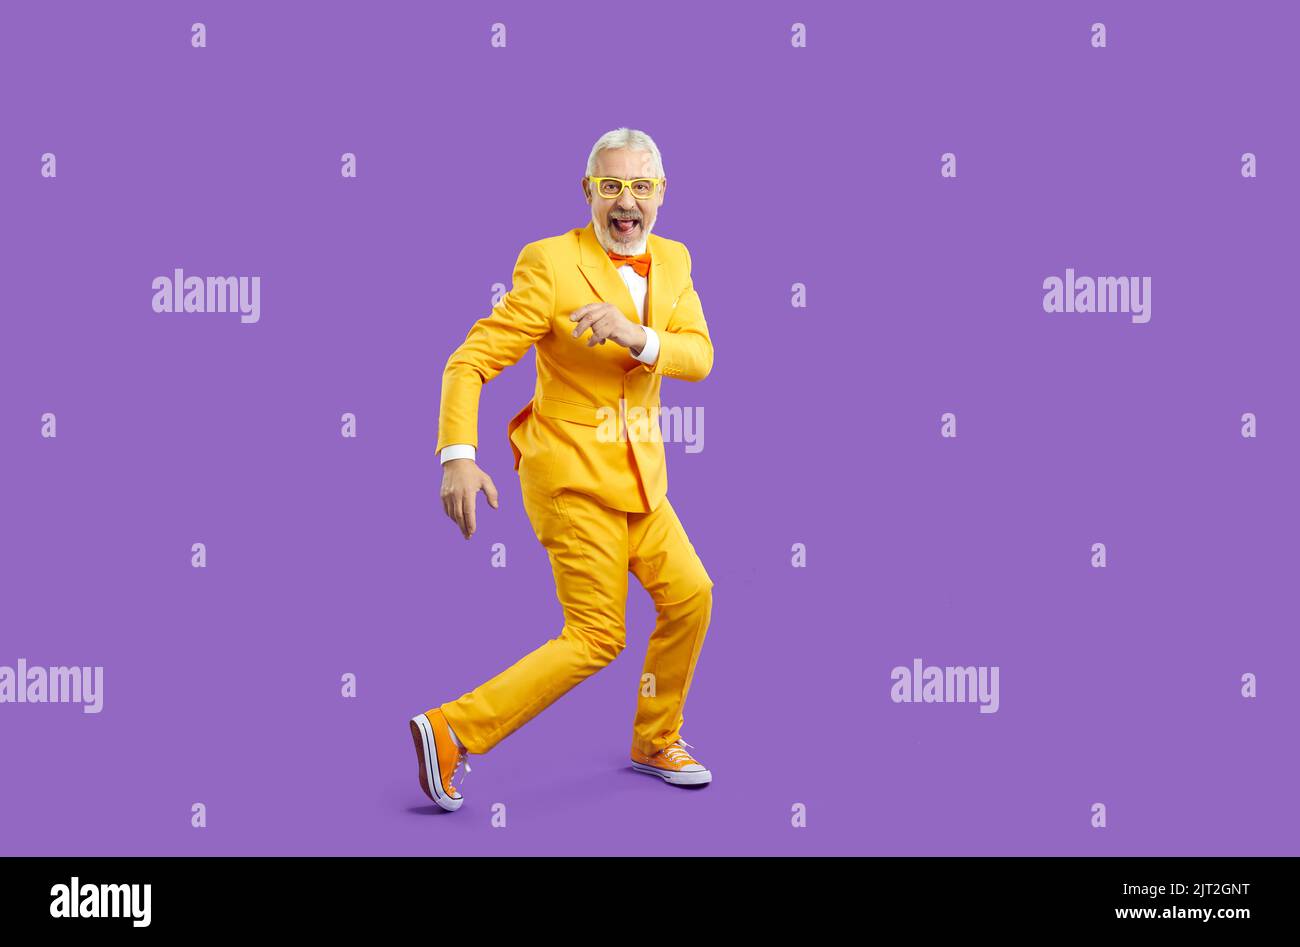 Cheerful trendy, eccentric and energetic senior man funny dancing isolated on purple background. Stock Photo